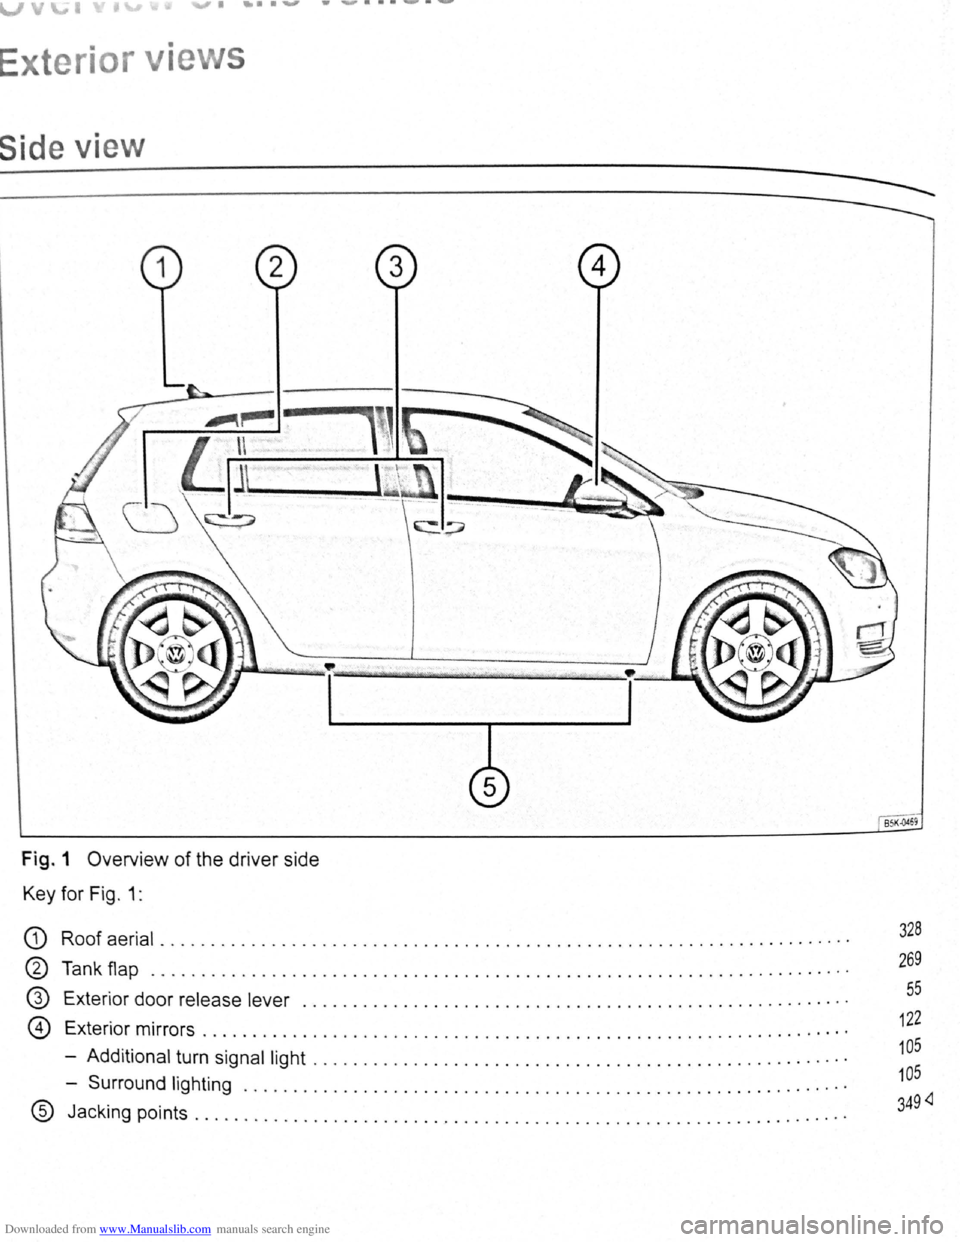 VOLKSWAGEN GOLF PLUS 2011  Owner´s Manual Downloaded from www.Manualslib.com manuals search engine V \...1 tv ...., .......................... ..... 
Exterior views 
Side view 
Fig.  1 Overview of the  driver  side 
Key  for Fig. 1: 
G) Roof 